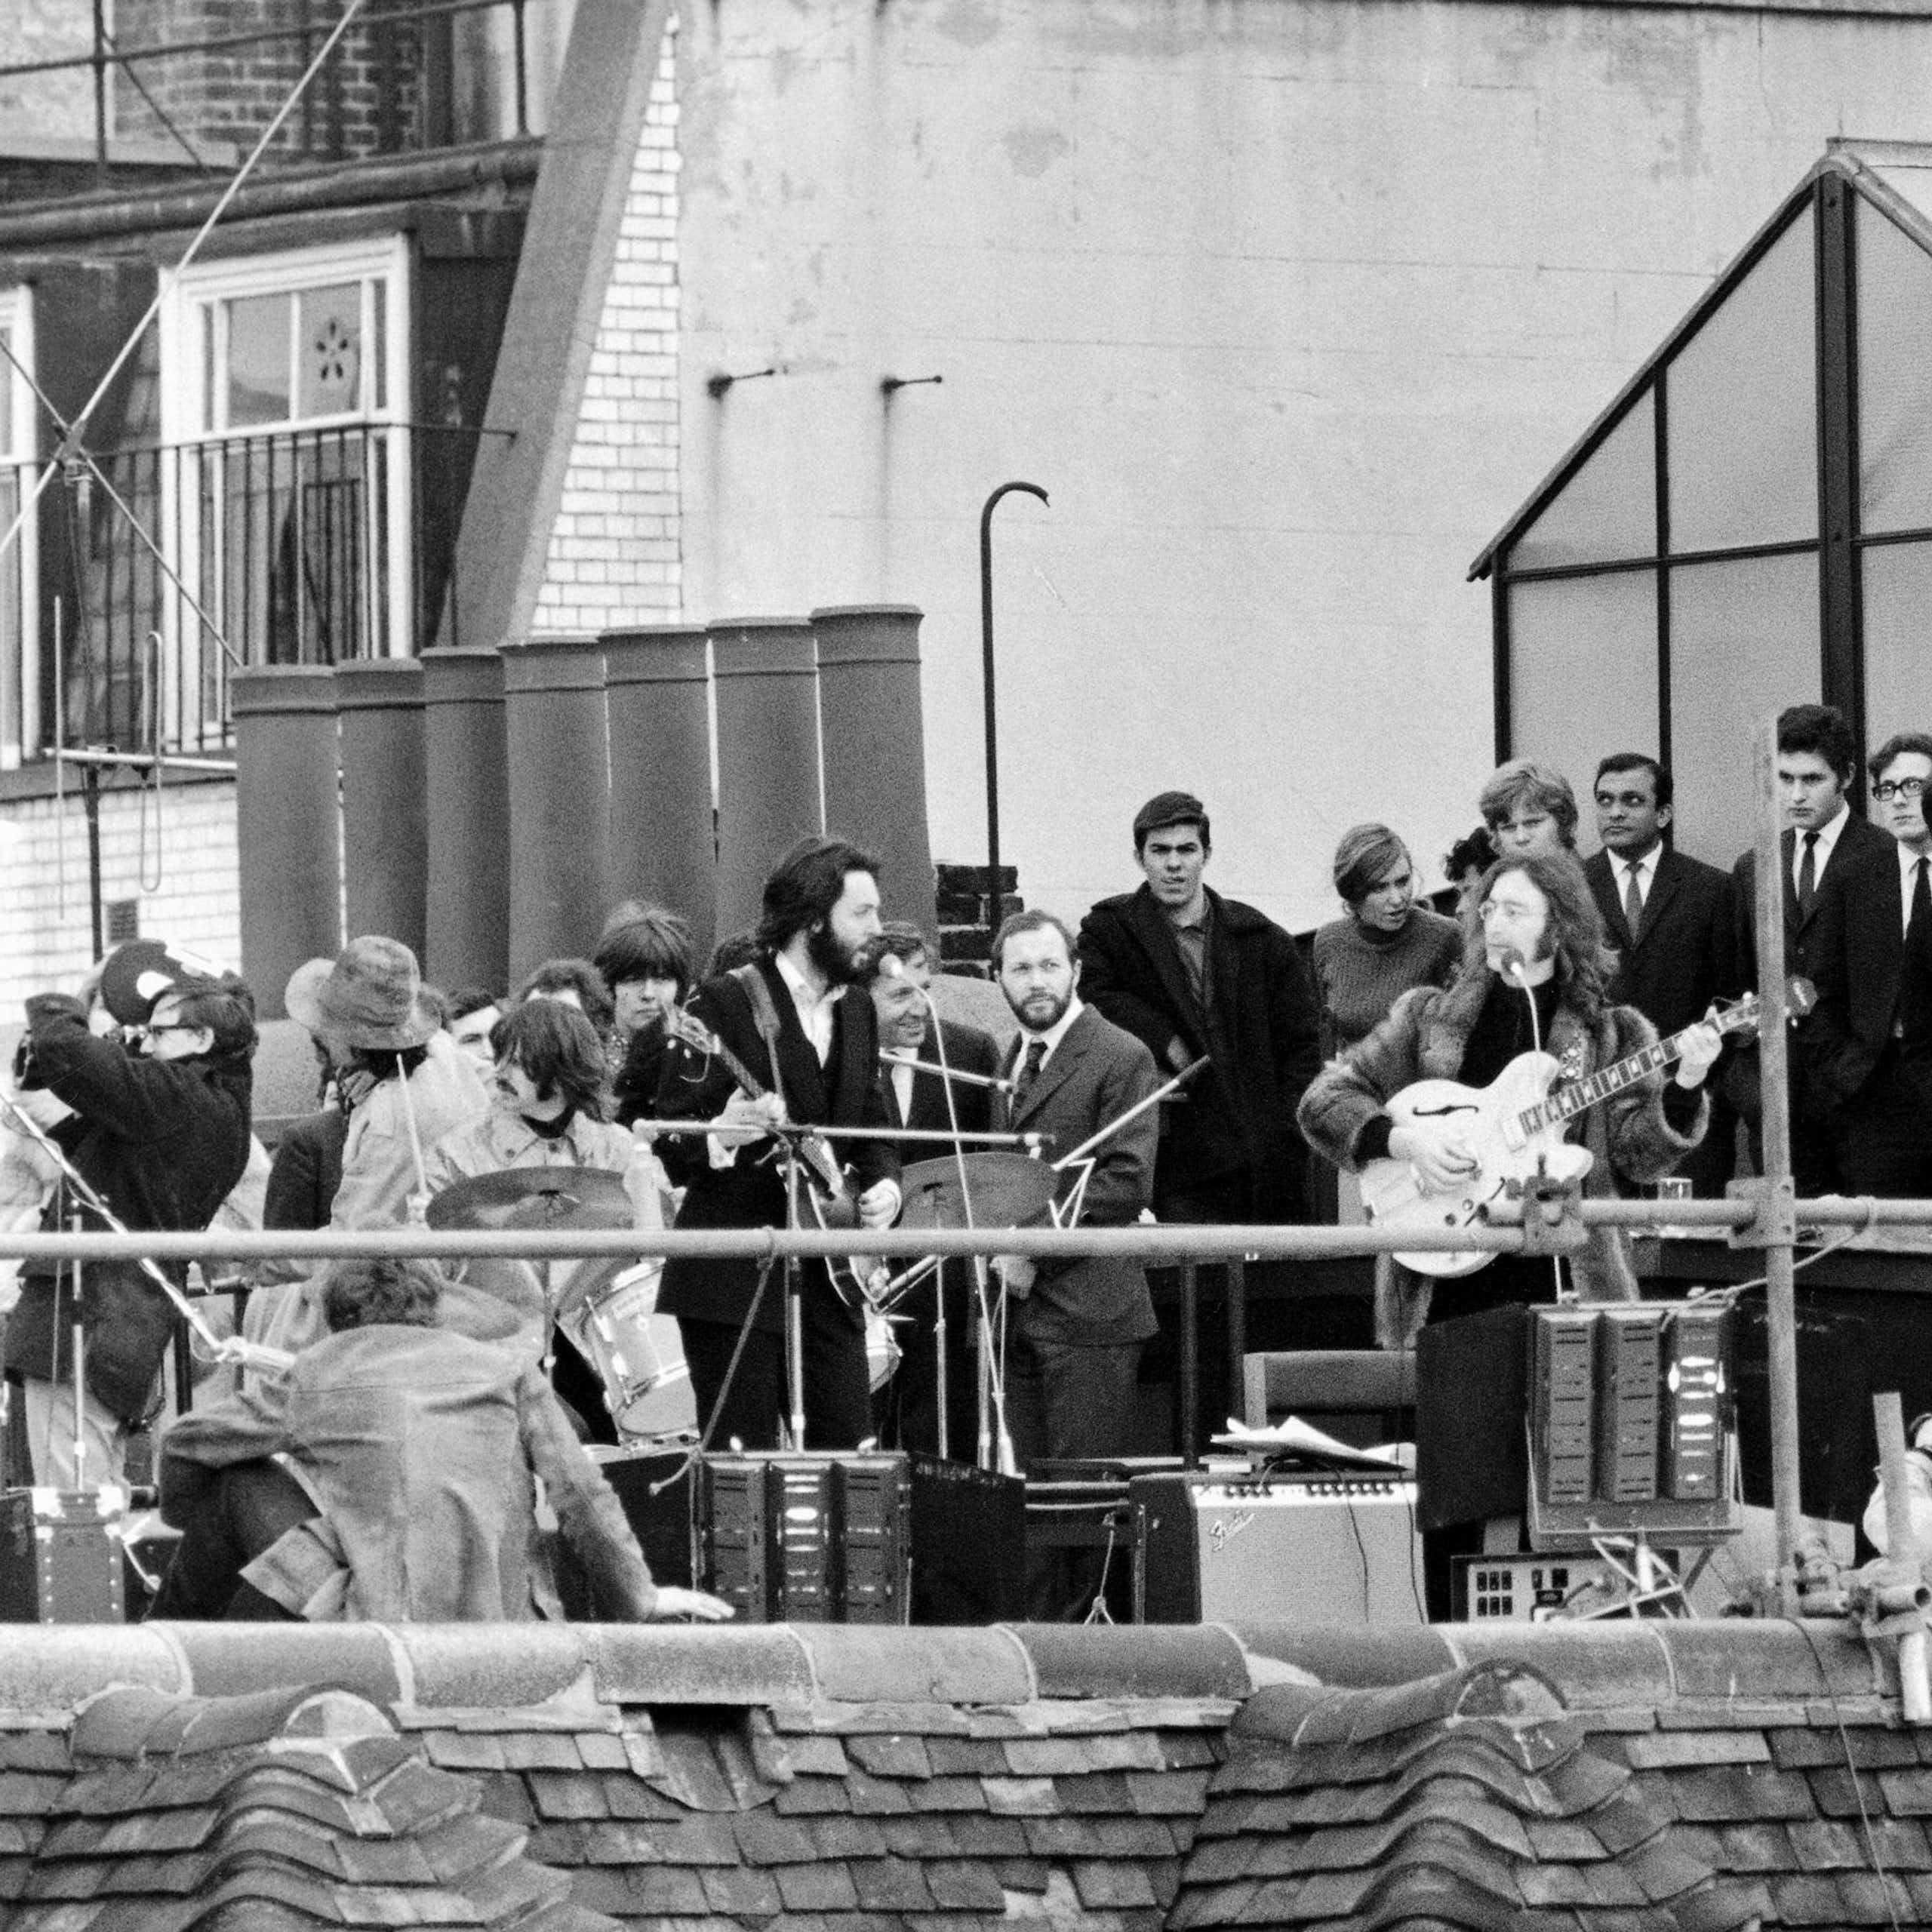 A black and white photo of The Beatles playing on the roof of a building.